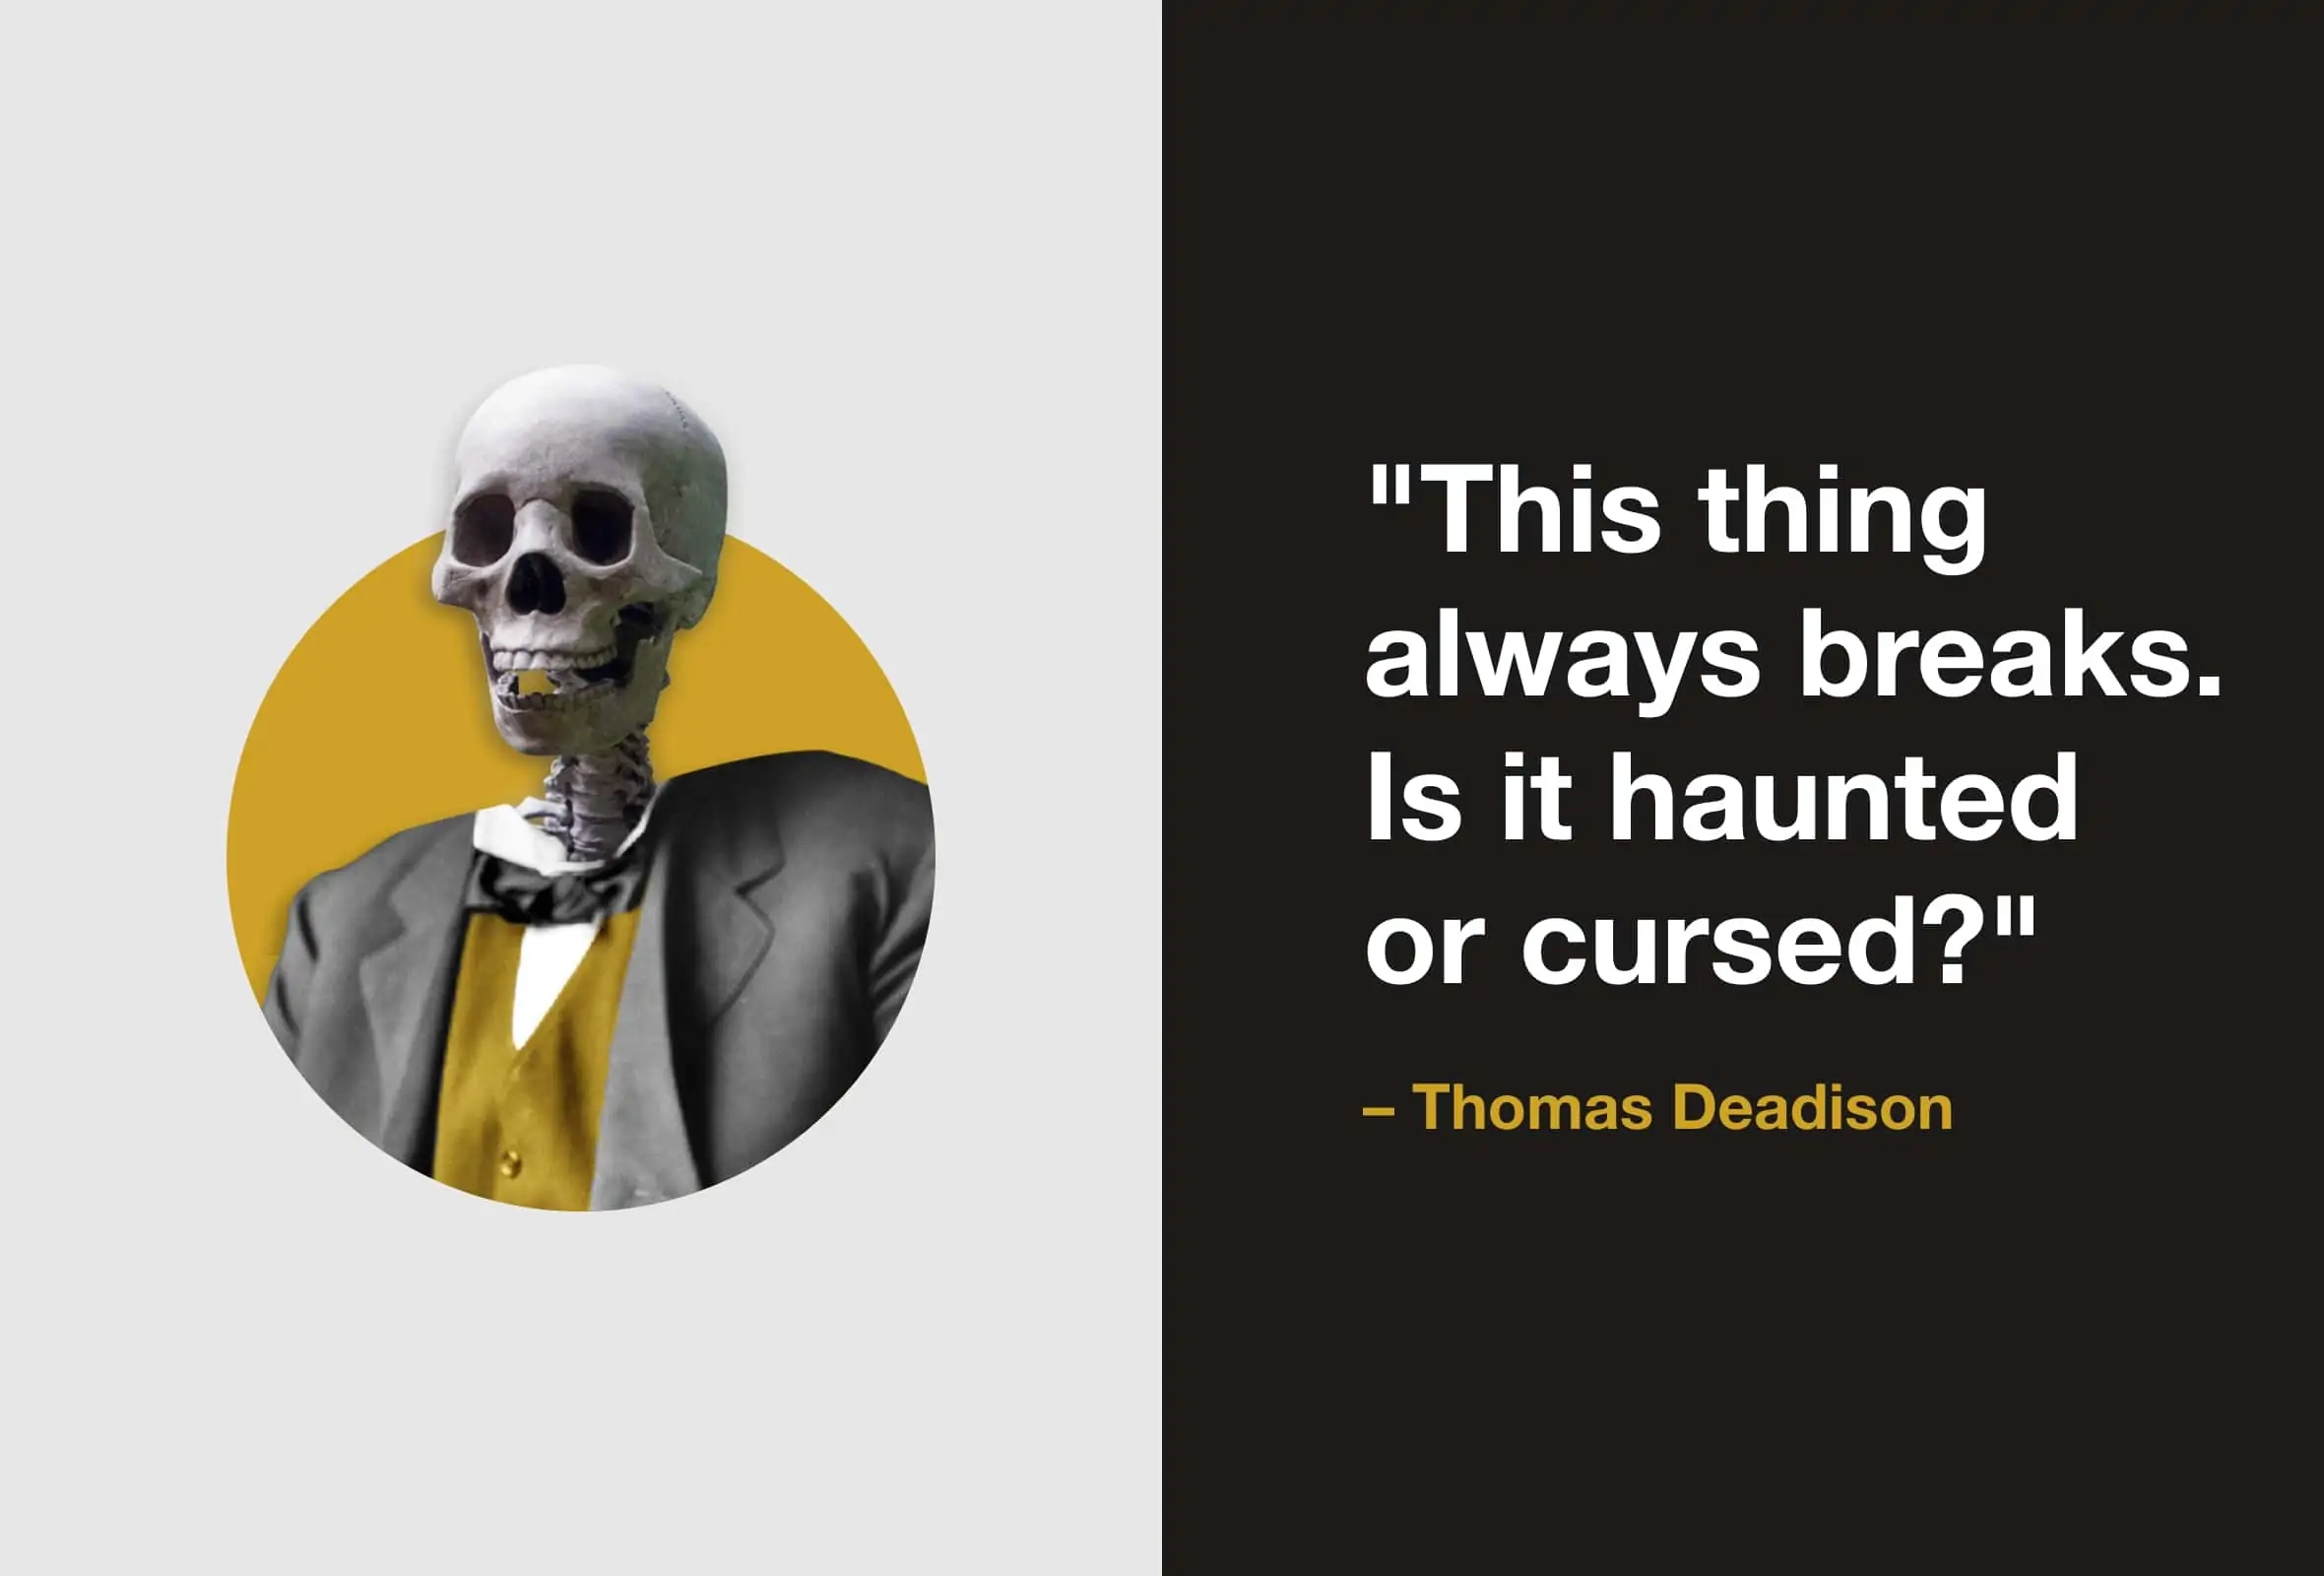 Image of a smiling skeleton with a quote "This thing always breaks. Is it haunted or cursed?" -Thomas Deadison